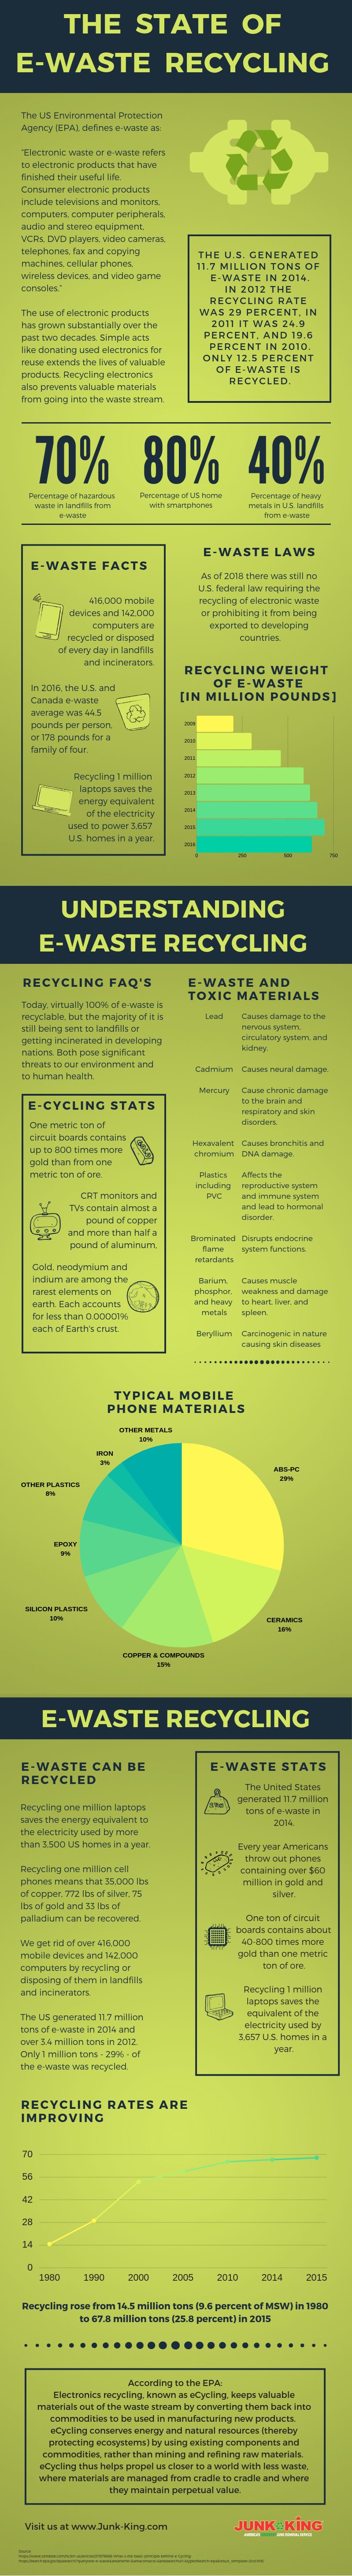 e-waste_recycling_infographic